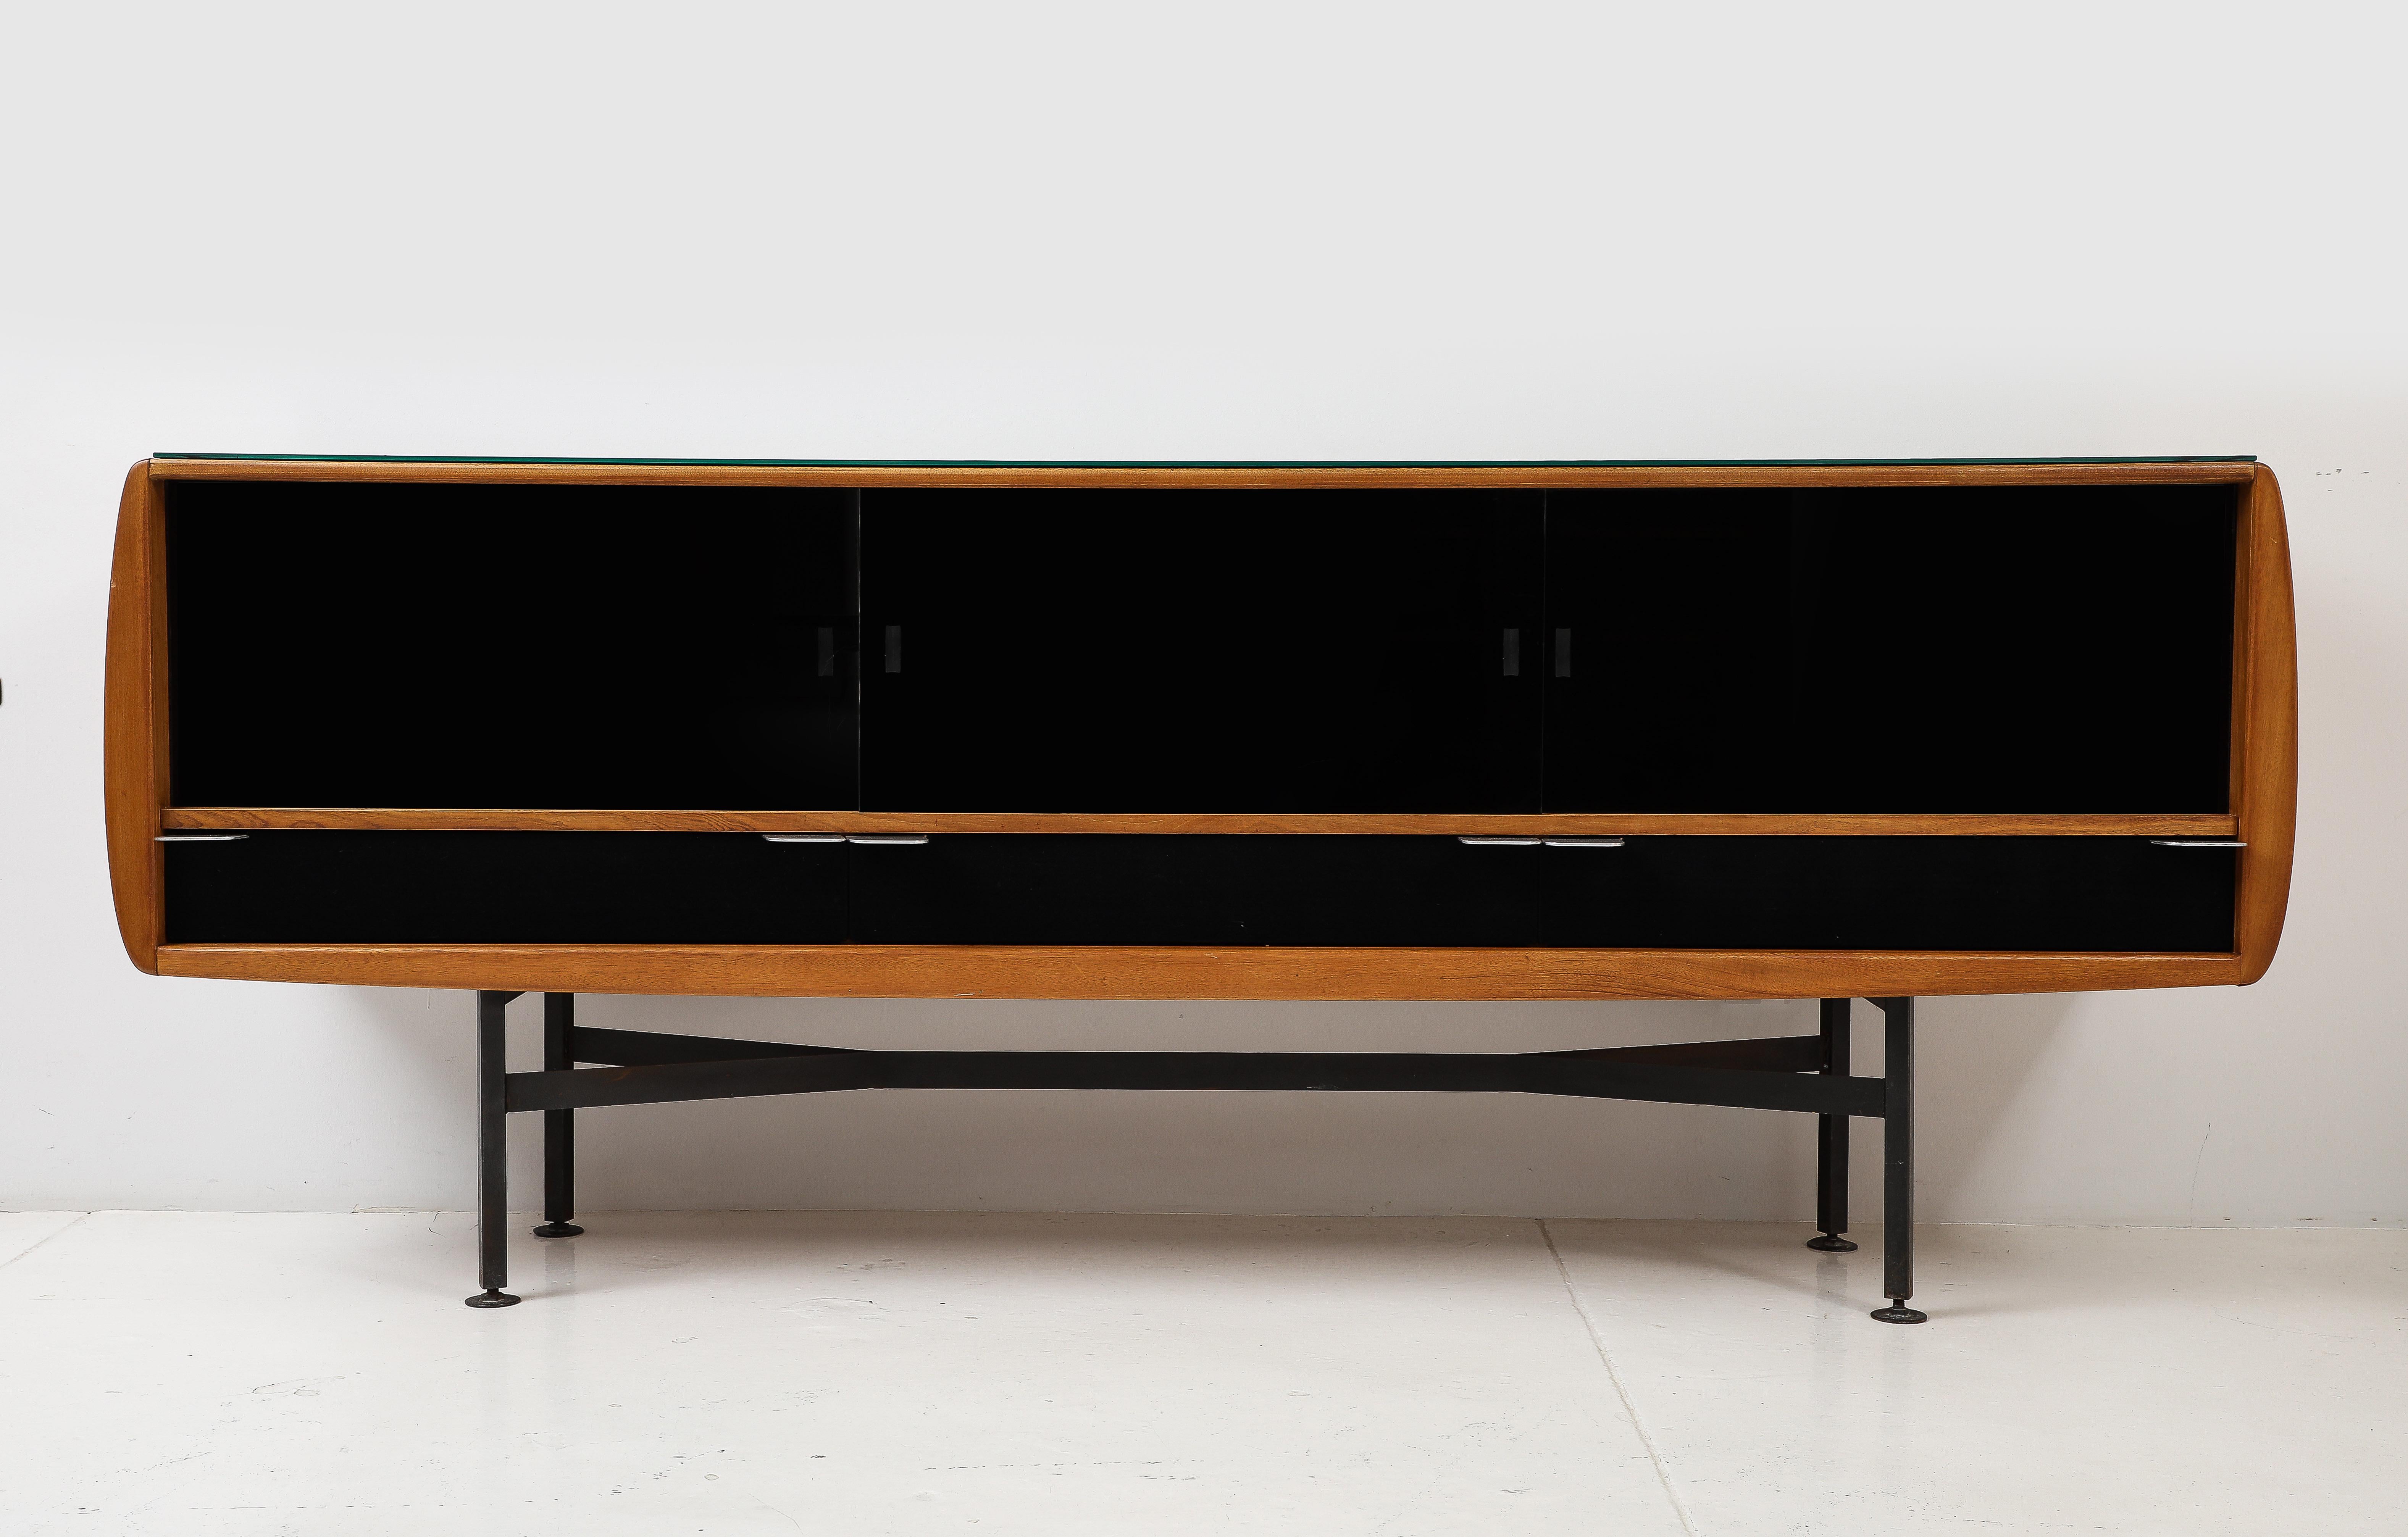 Ash and black Opaline glass sideboard on a wrought iron base, hand-made aluminum handles, an exceptional custom piece referenced in the Pompidou museum library.
